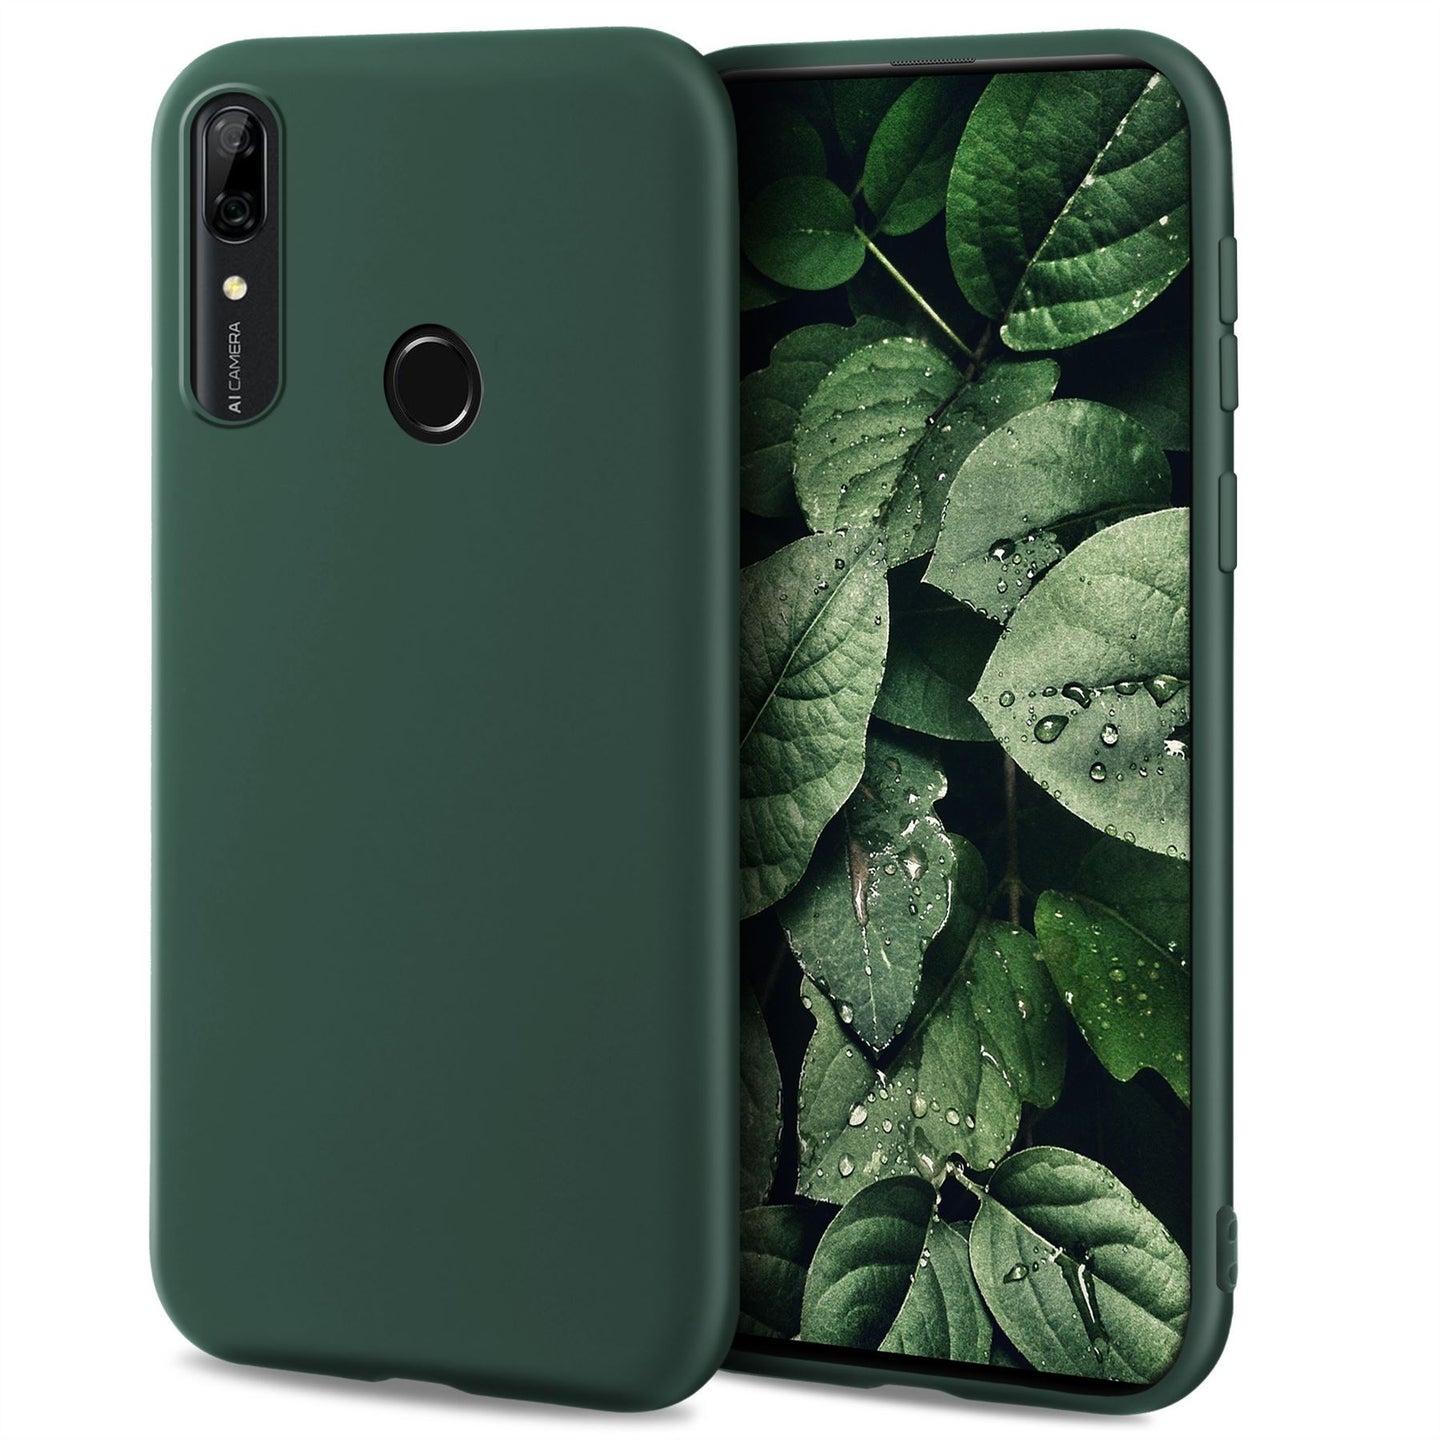 Moozy Minimalist Series Silicone Case for Huawei P Smart Z and Honor 9X, Midnight Green - Matte Finish Slim Soft TPU Cover